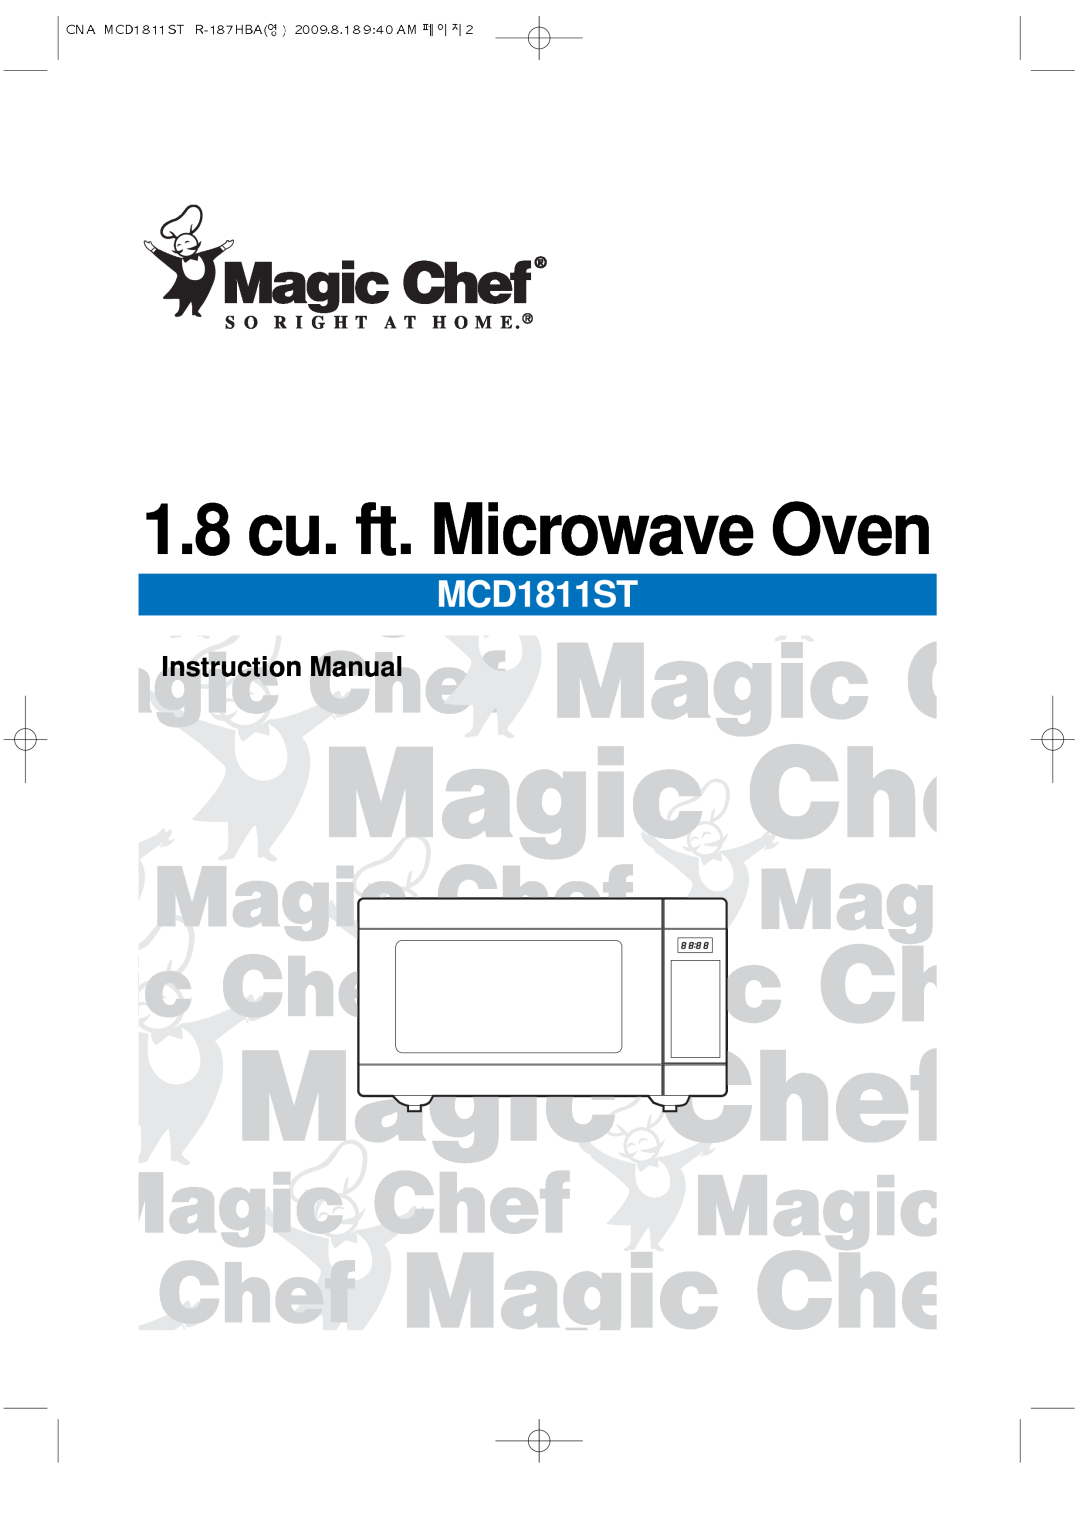 Magic Chef MCD1811ST instruction manual 1.8 cu. ft. Microwave Oven 